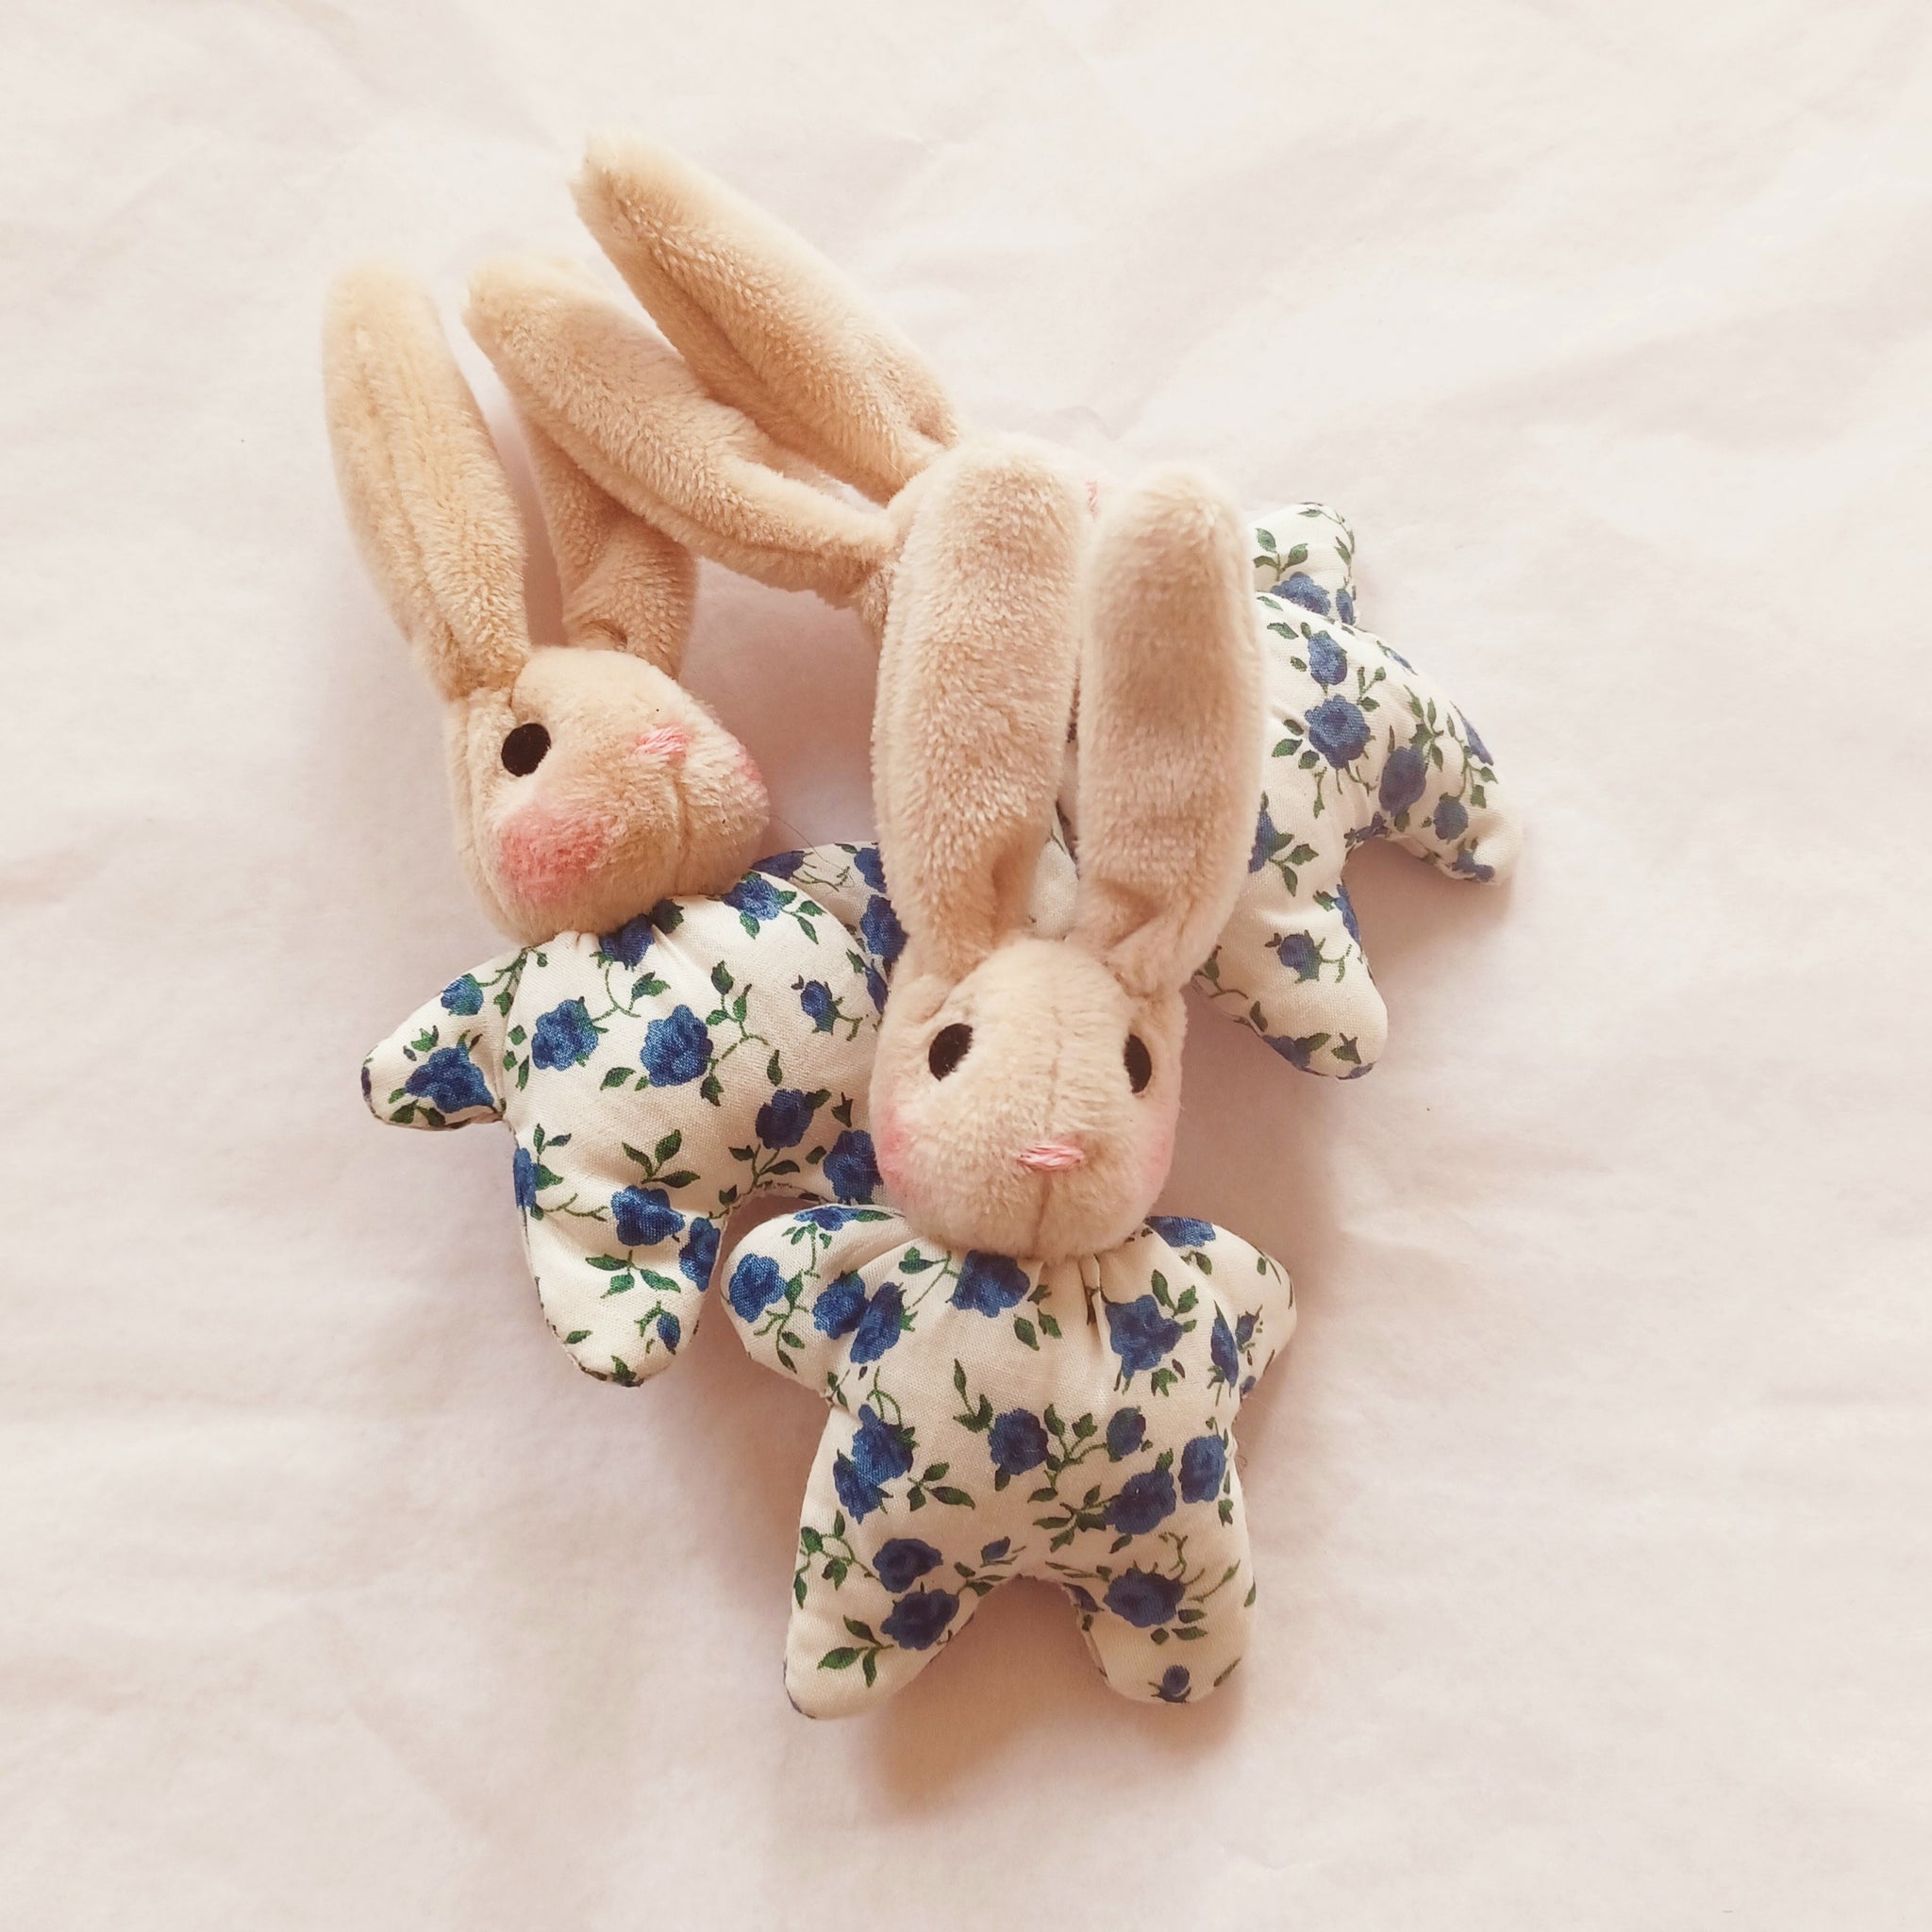 Tiny bunnies - Liberty floral blue rose buds, ears up